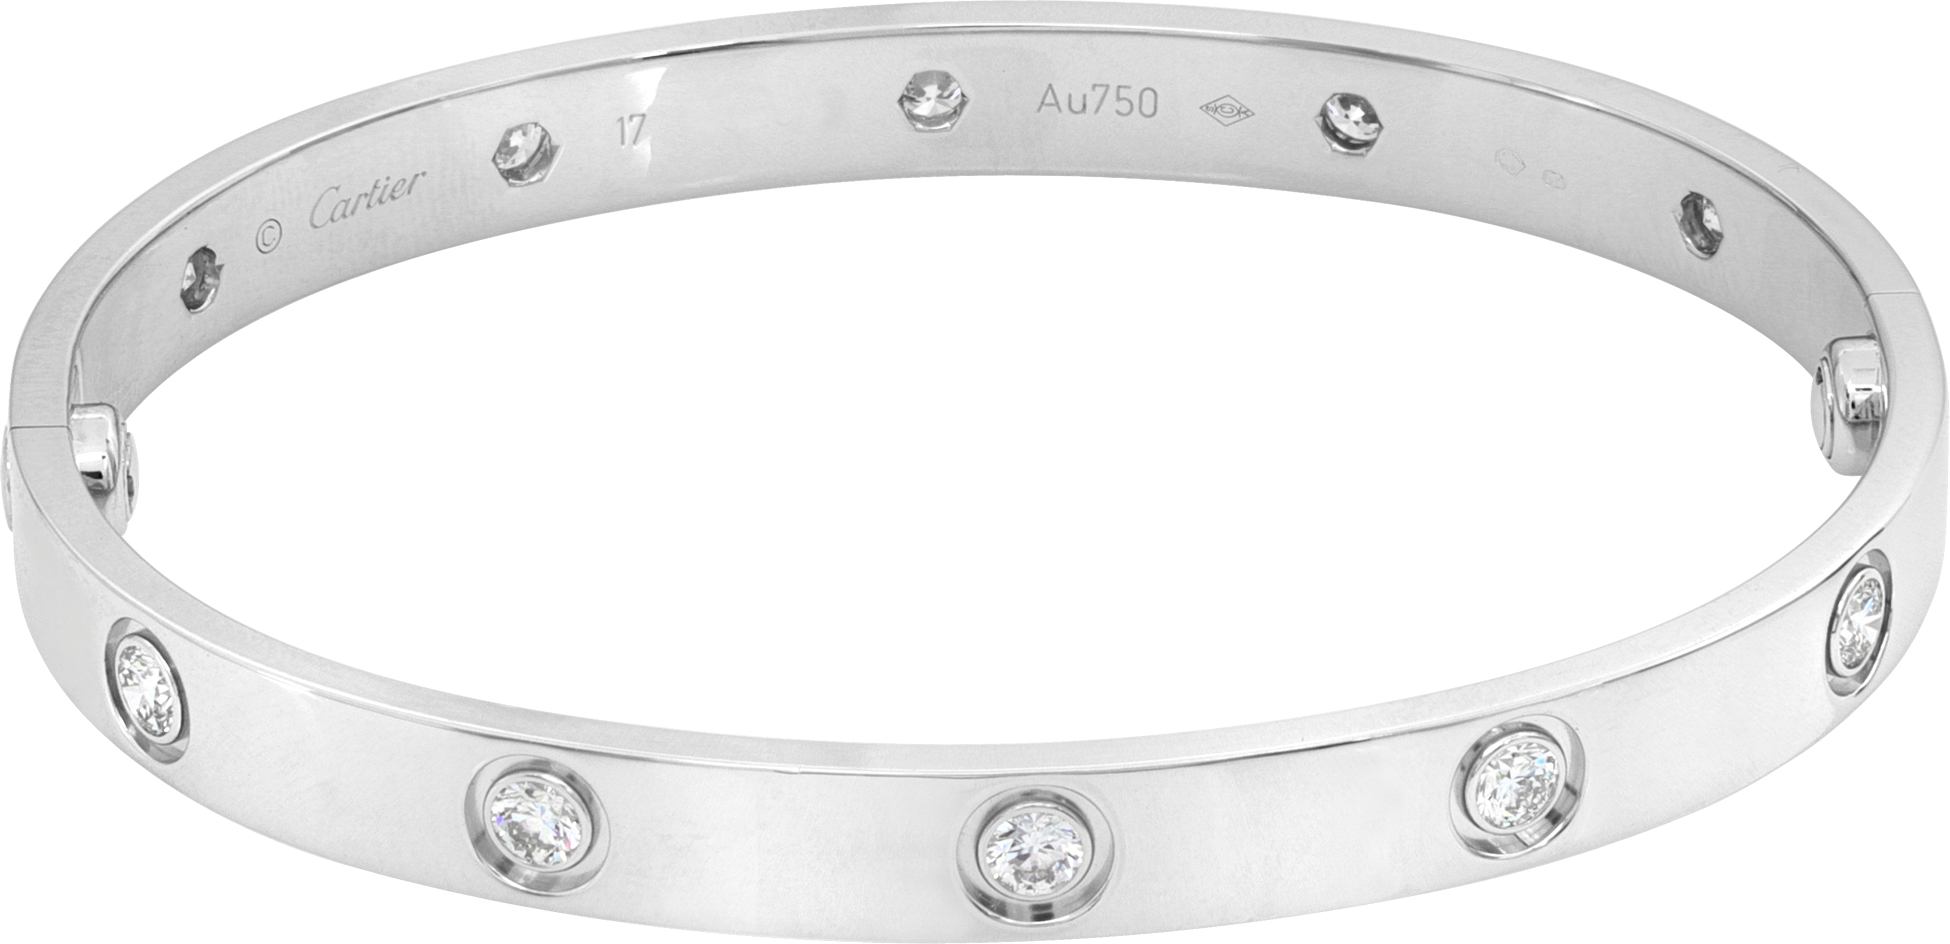 Cartier Love braclet with 10 diamonds in 18k white gold size 17 (Stones)